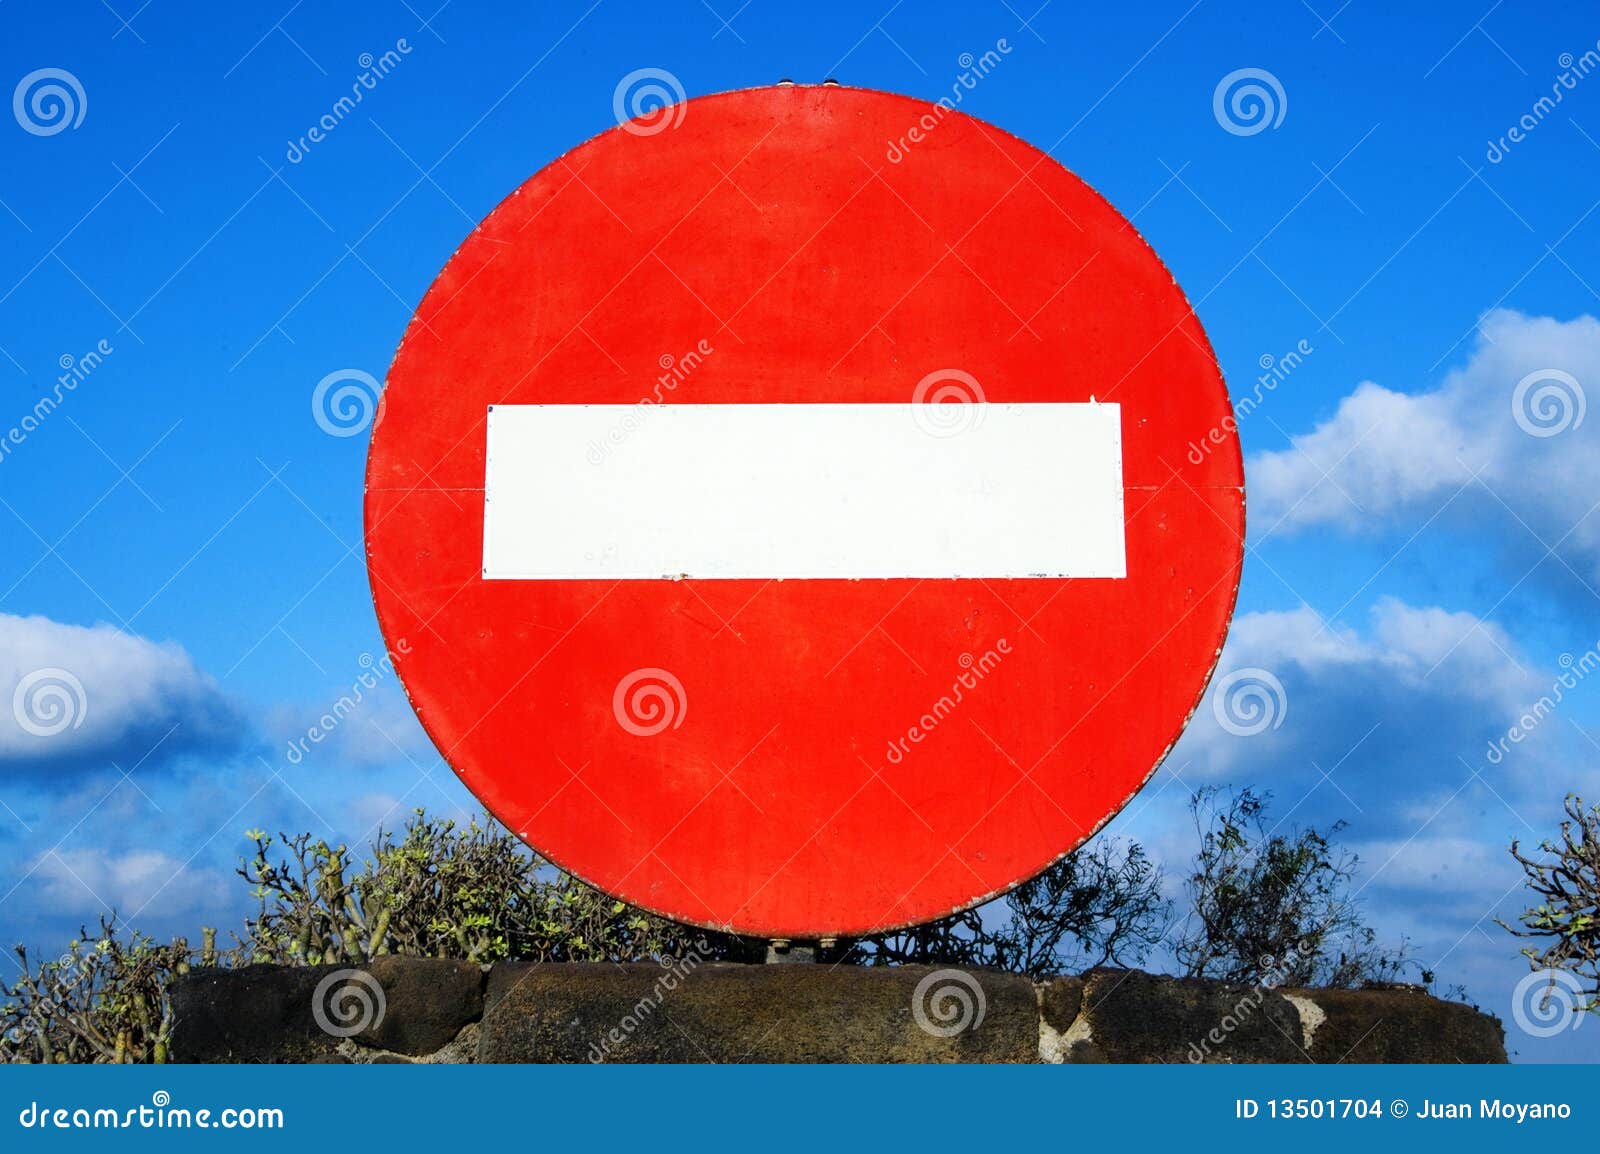 Red No Entry Traffic Sign On Metal Pole. Road Sign Royalty-Free Stock ...